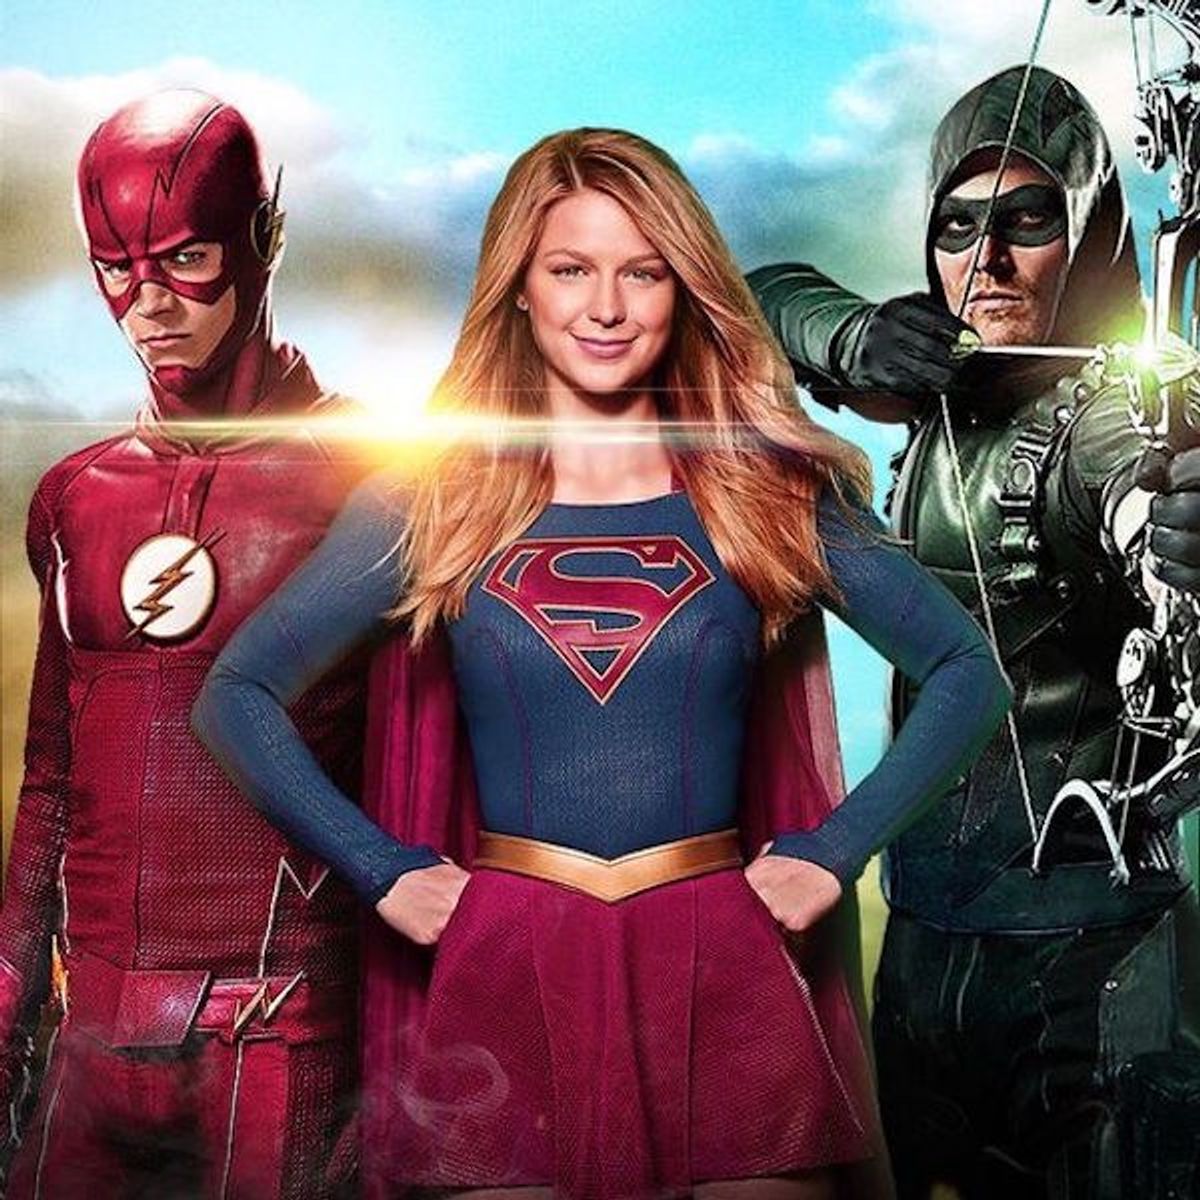 Group Projects, As Told By The Flash, The Arrow And Supergirl